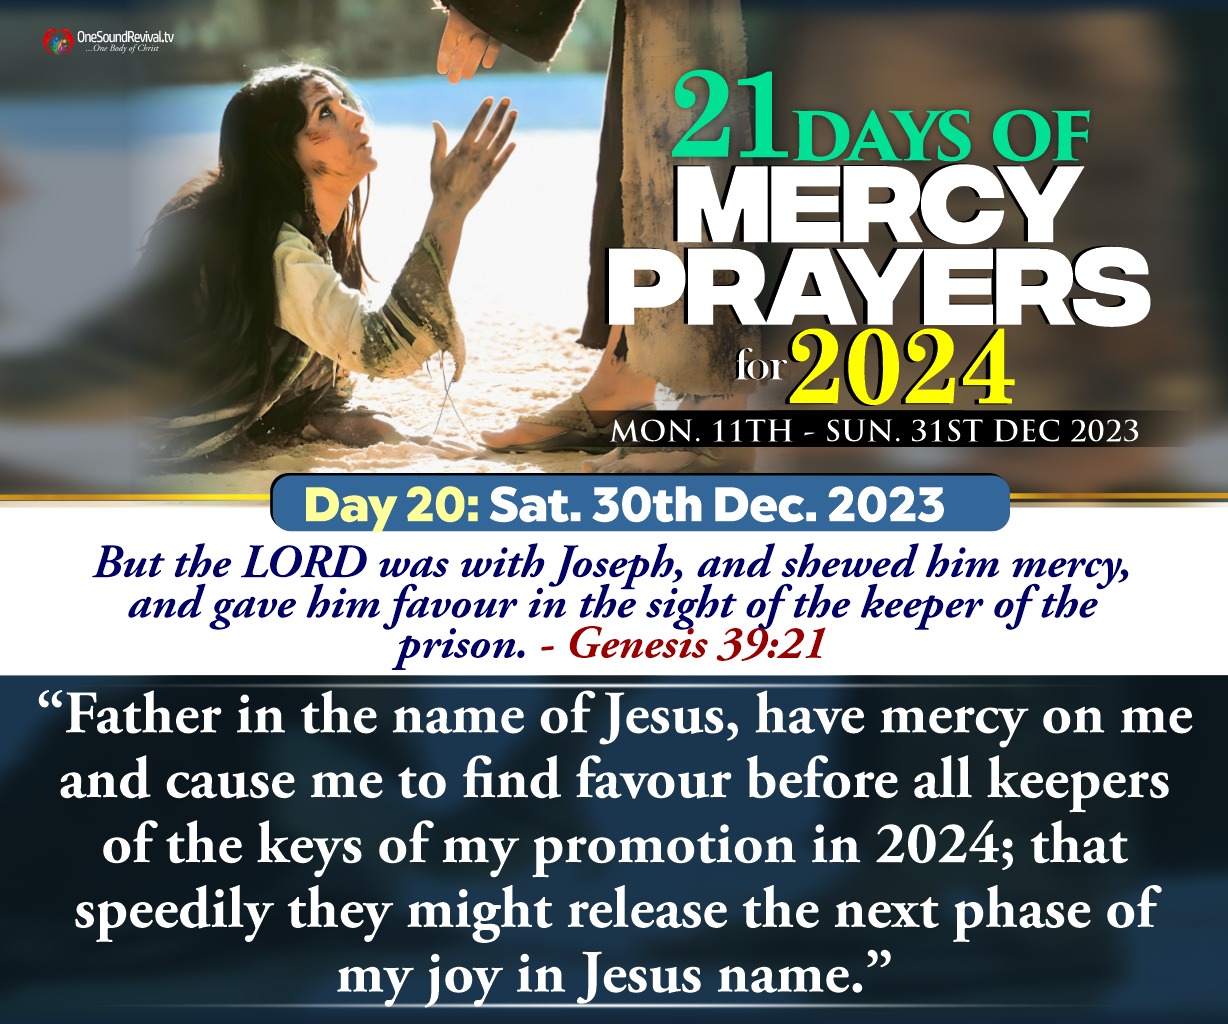 Mercy Prayer with Prophet Isaiah Wealth Day 20